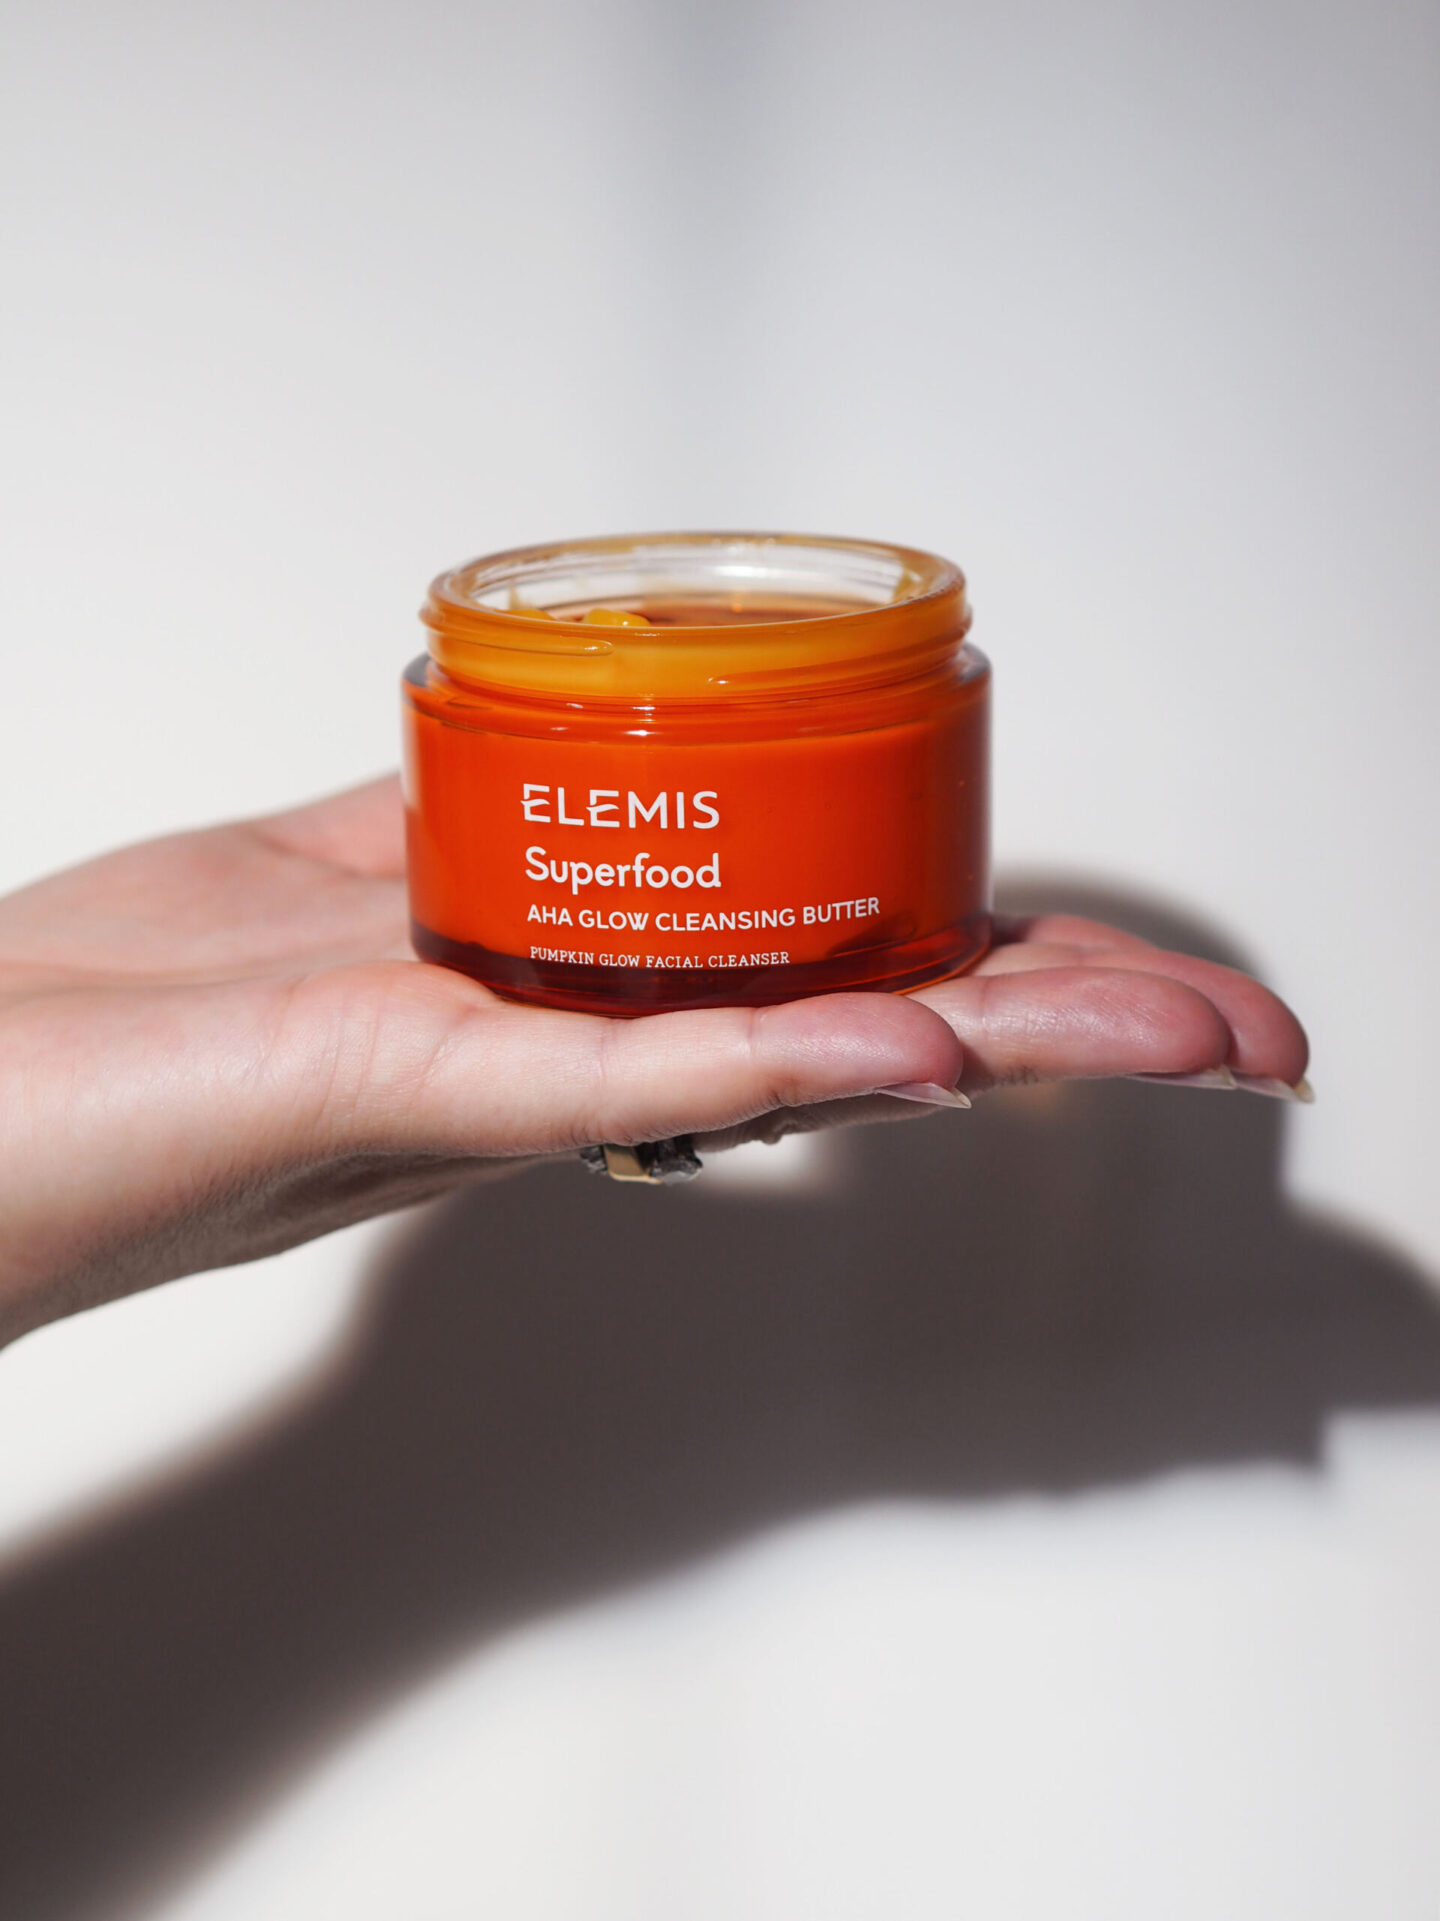 Elemis Superfood aha glow cleansing butter